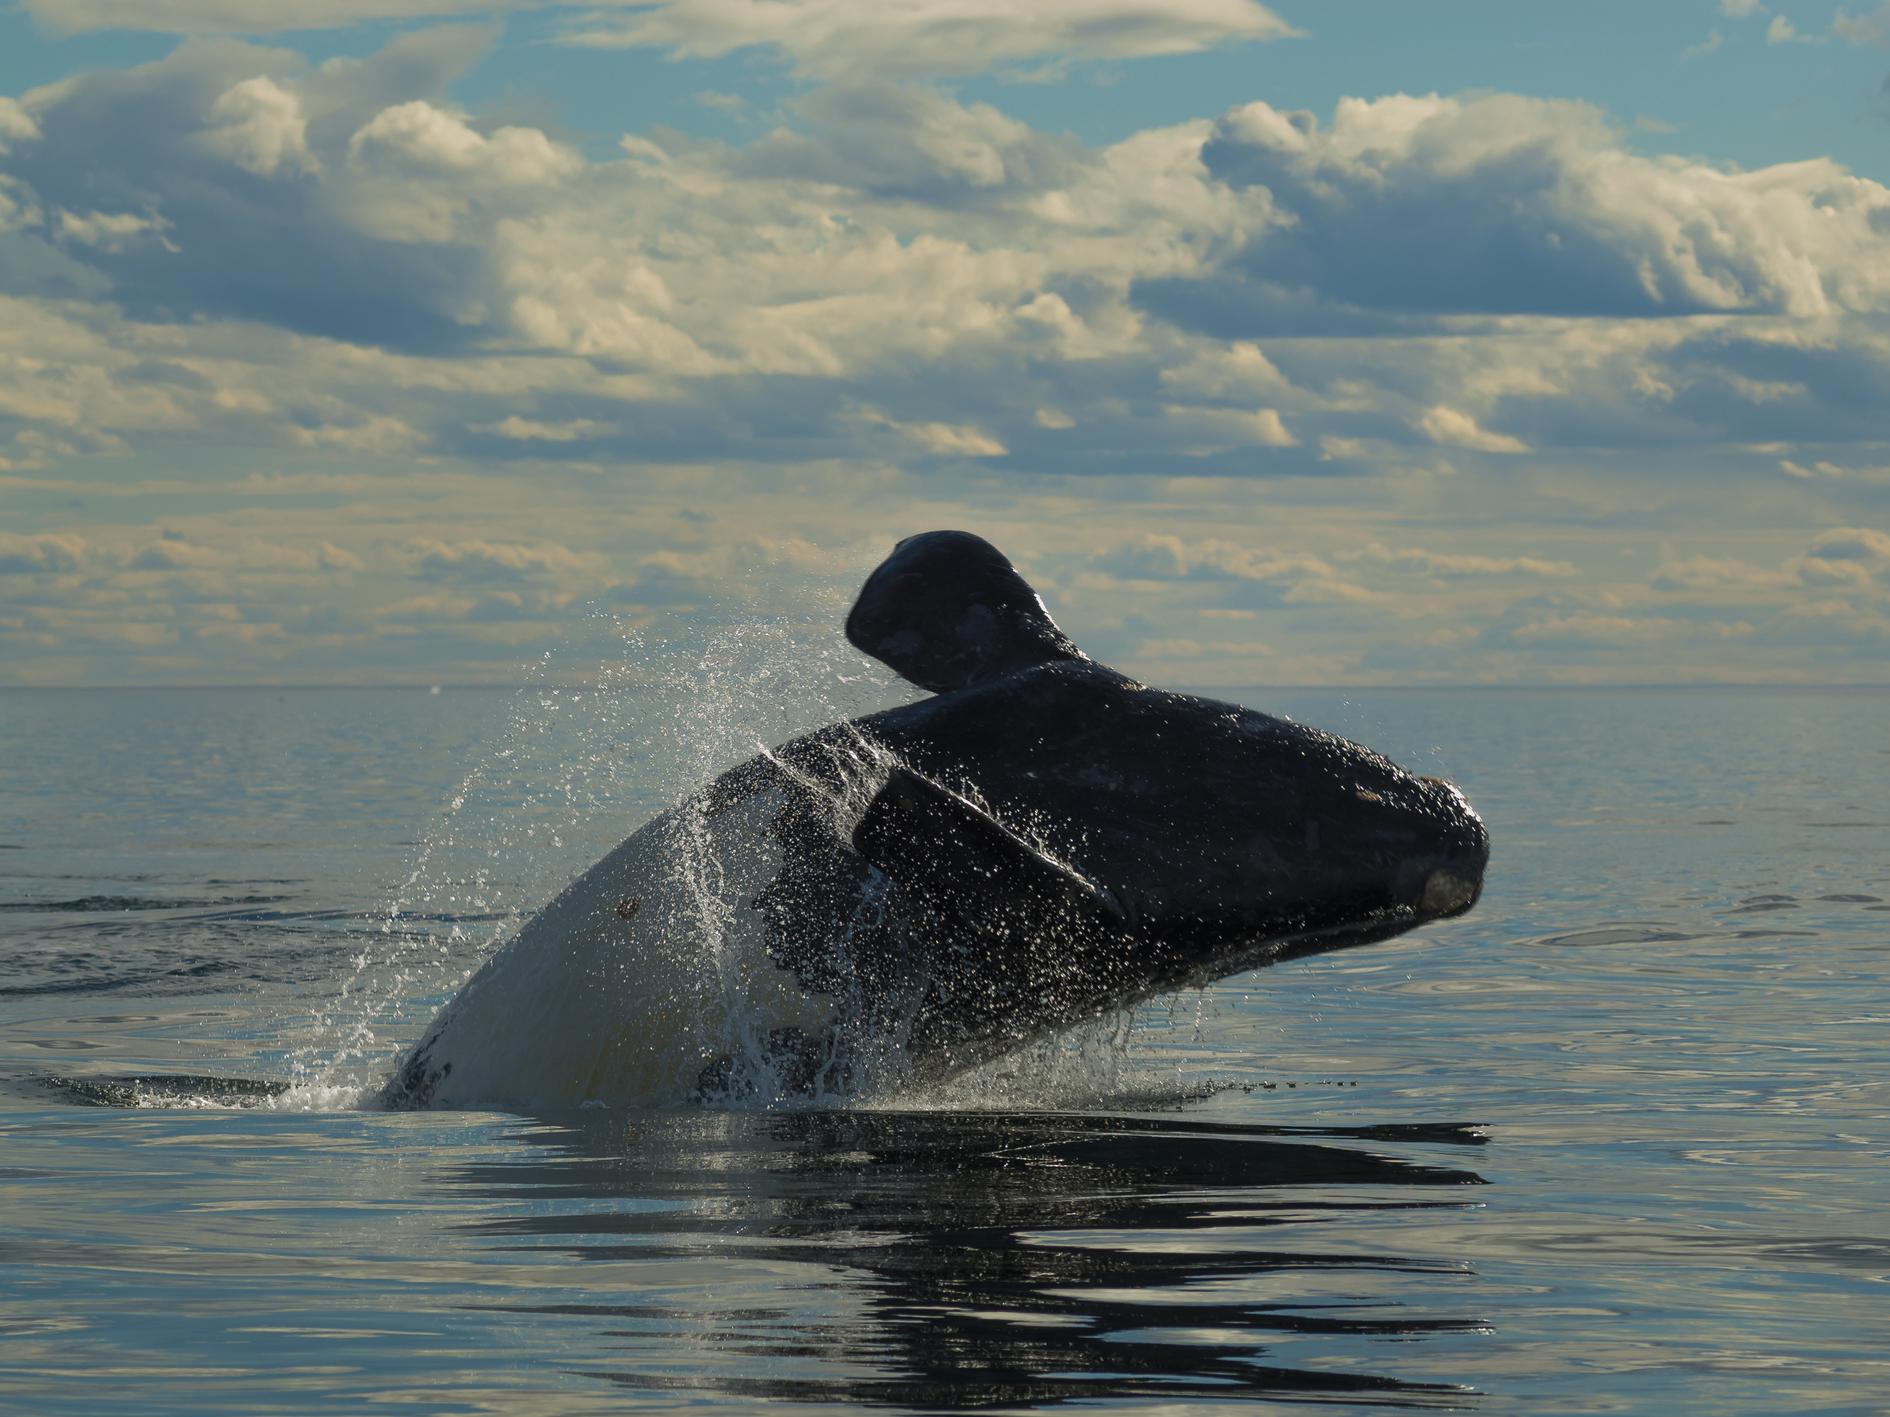 Right whale populations are among those that have recovered in recent decades